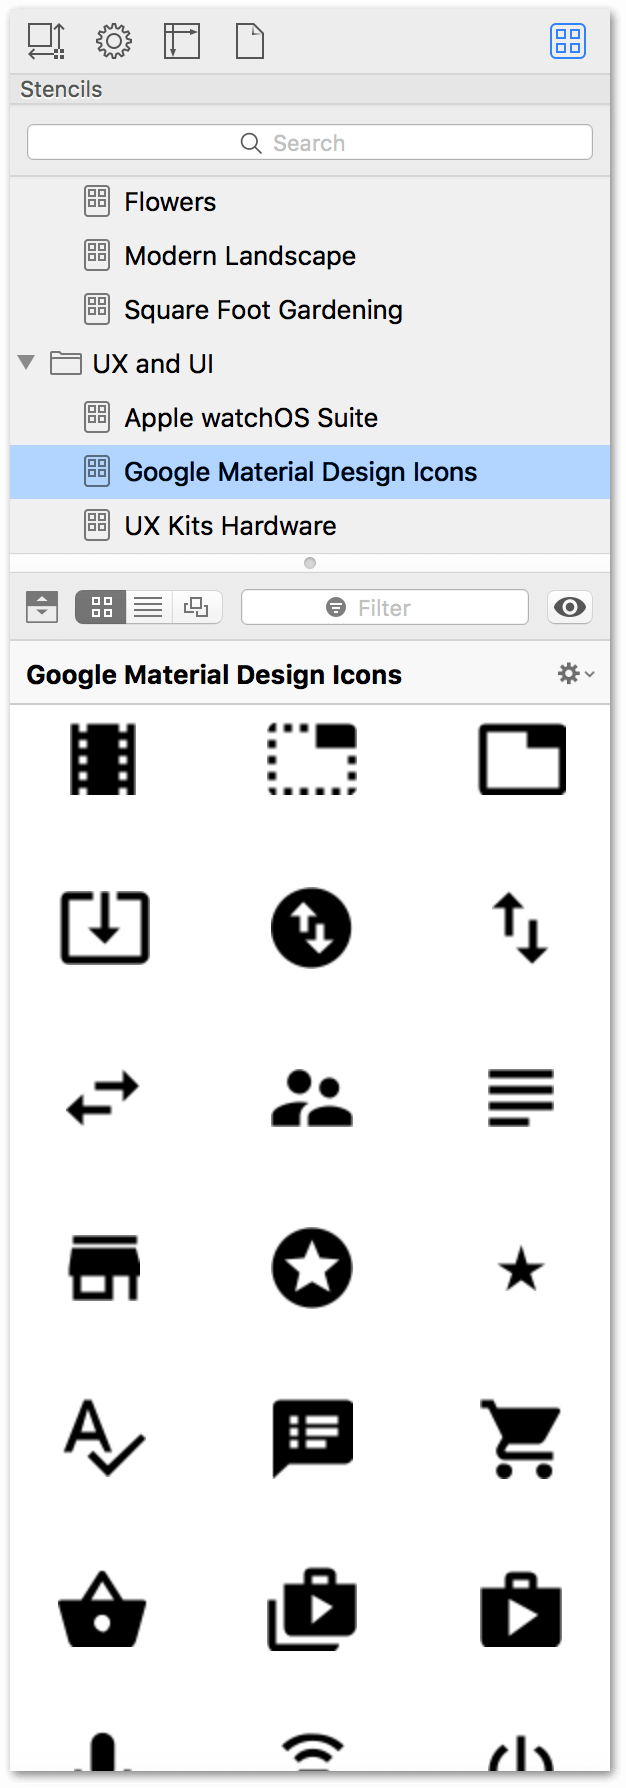 The Stencils Browser as shown in the right sidebar